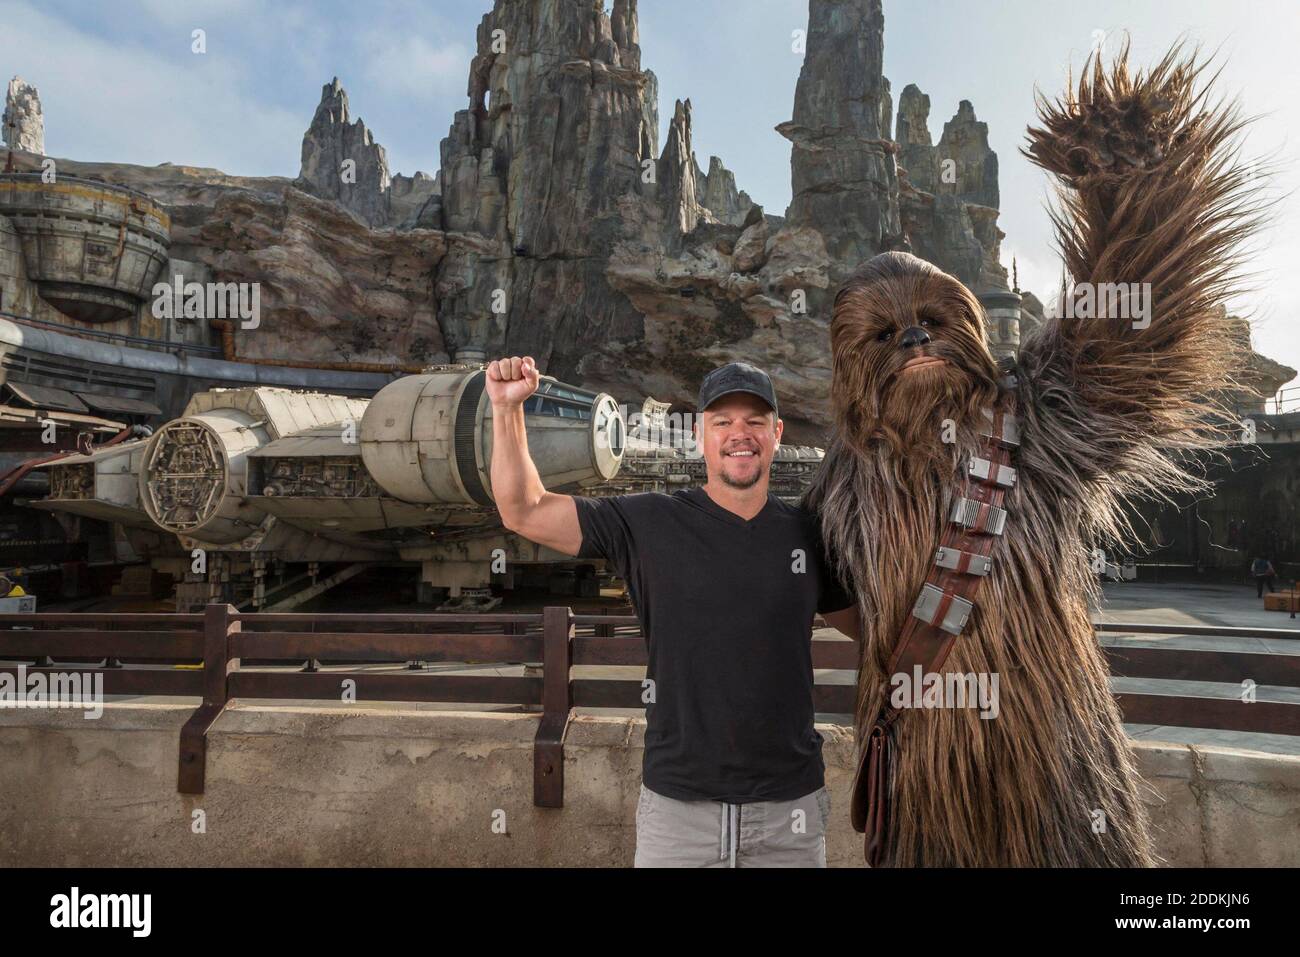 HANDOUT - Matt Damon encounters Chewbacca at the new Star Wars: Galaxy's  Edge at Disneyland Park in Anaheim, Los Angeles, CA, USA, on August 5,  2019. Damon who was vacationing with family,